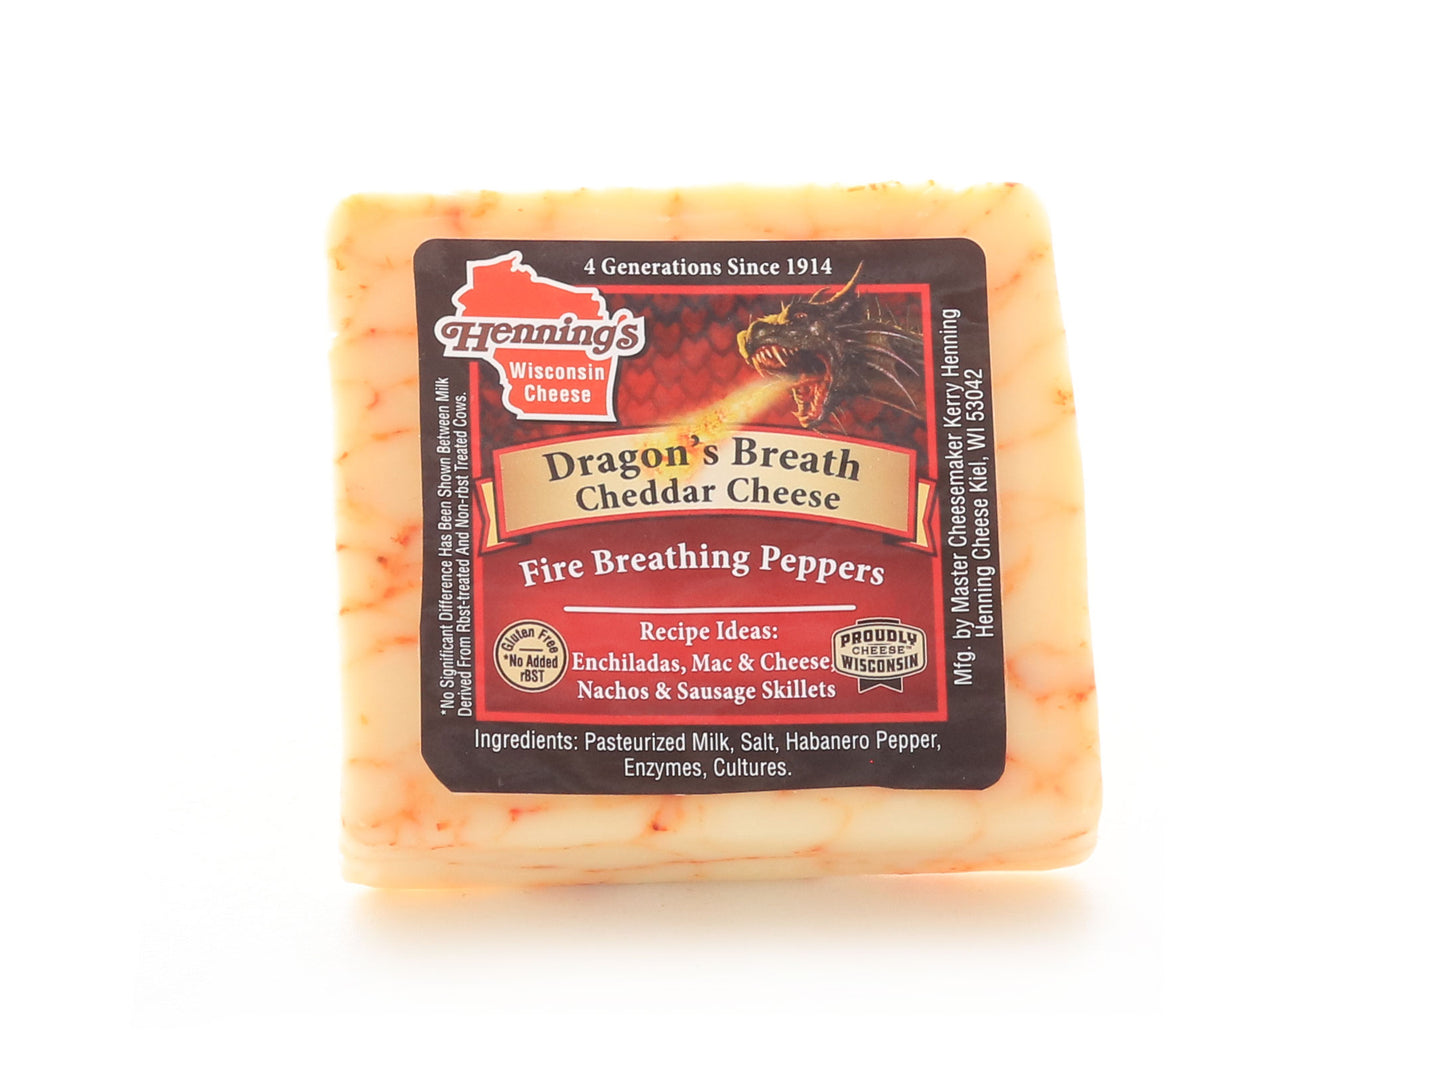 8 ounces of spicy white cheddar wisconsin cheese